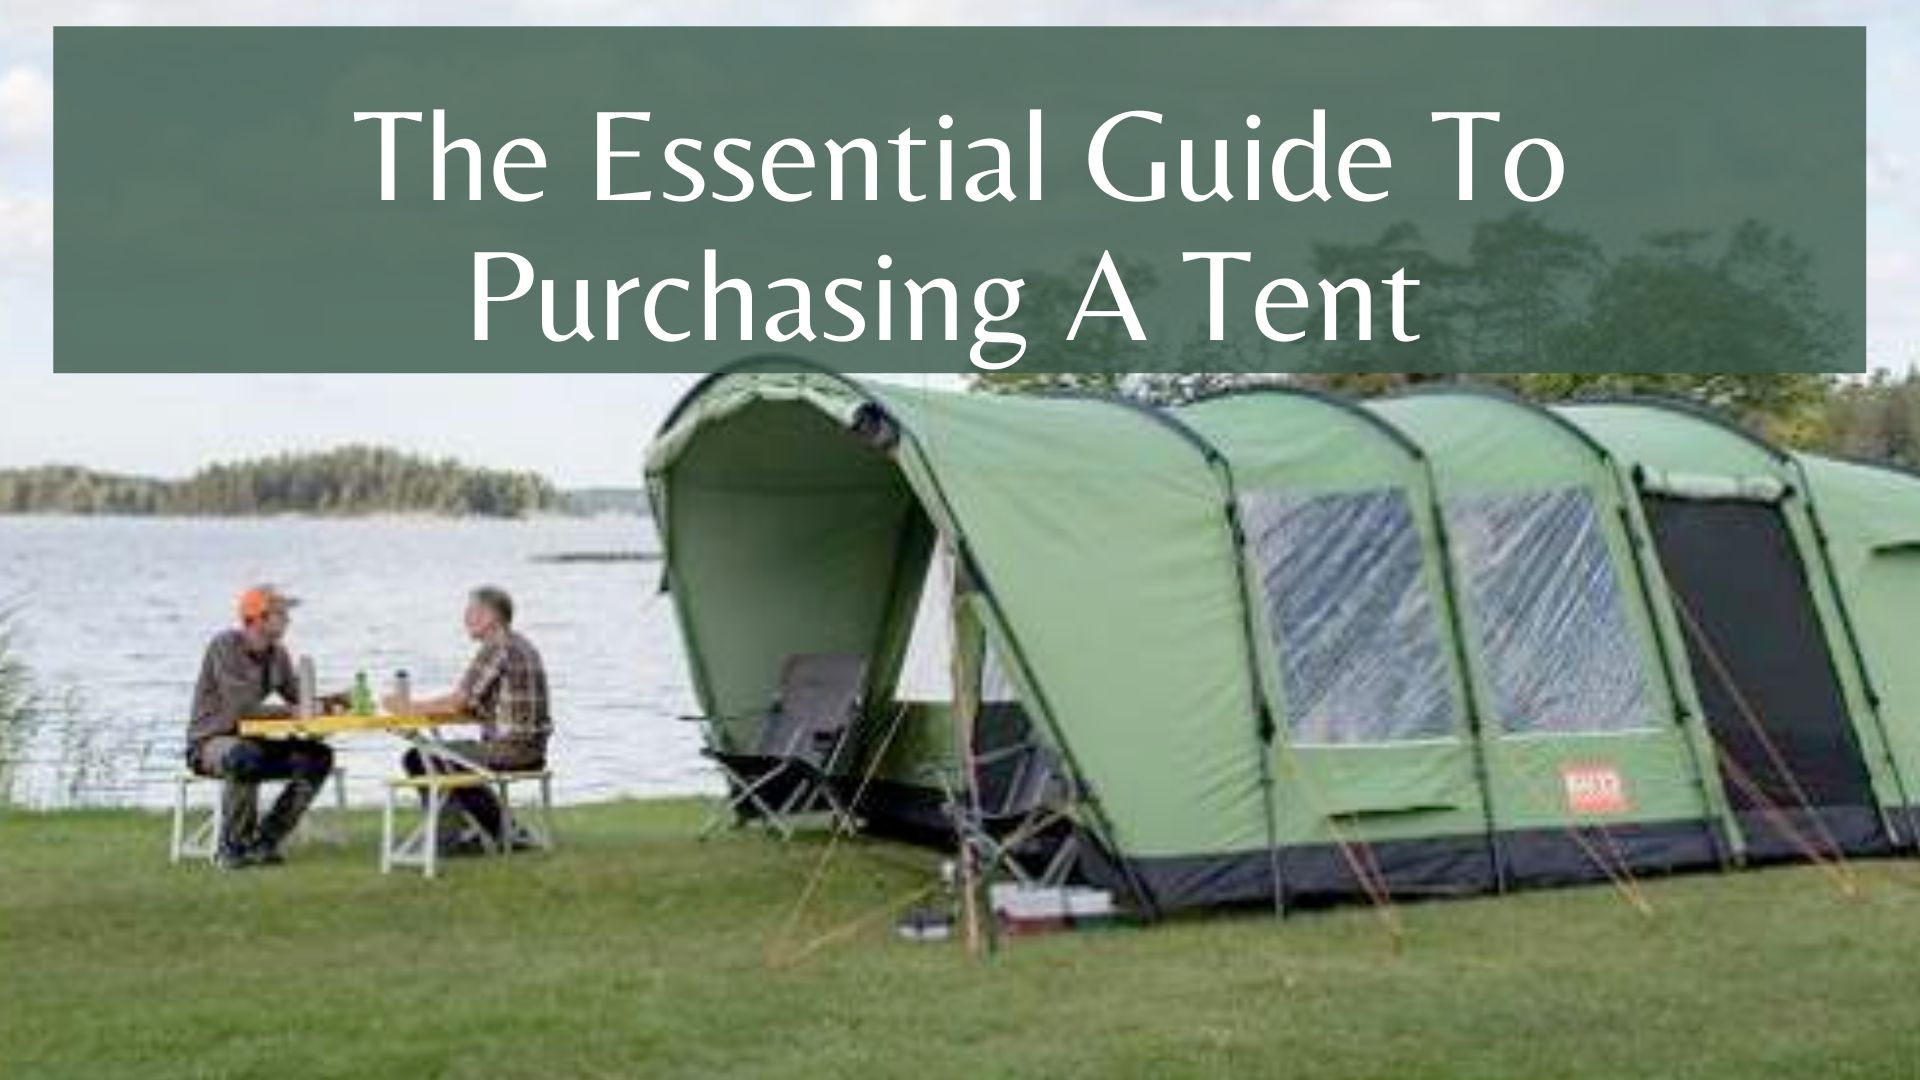 The Essential Guide To Purchasing A Tent